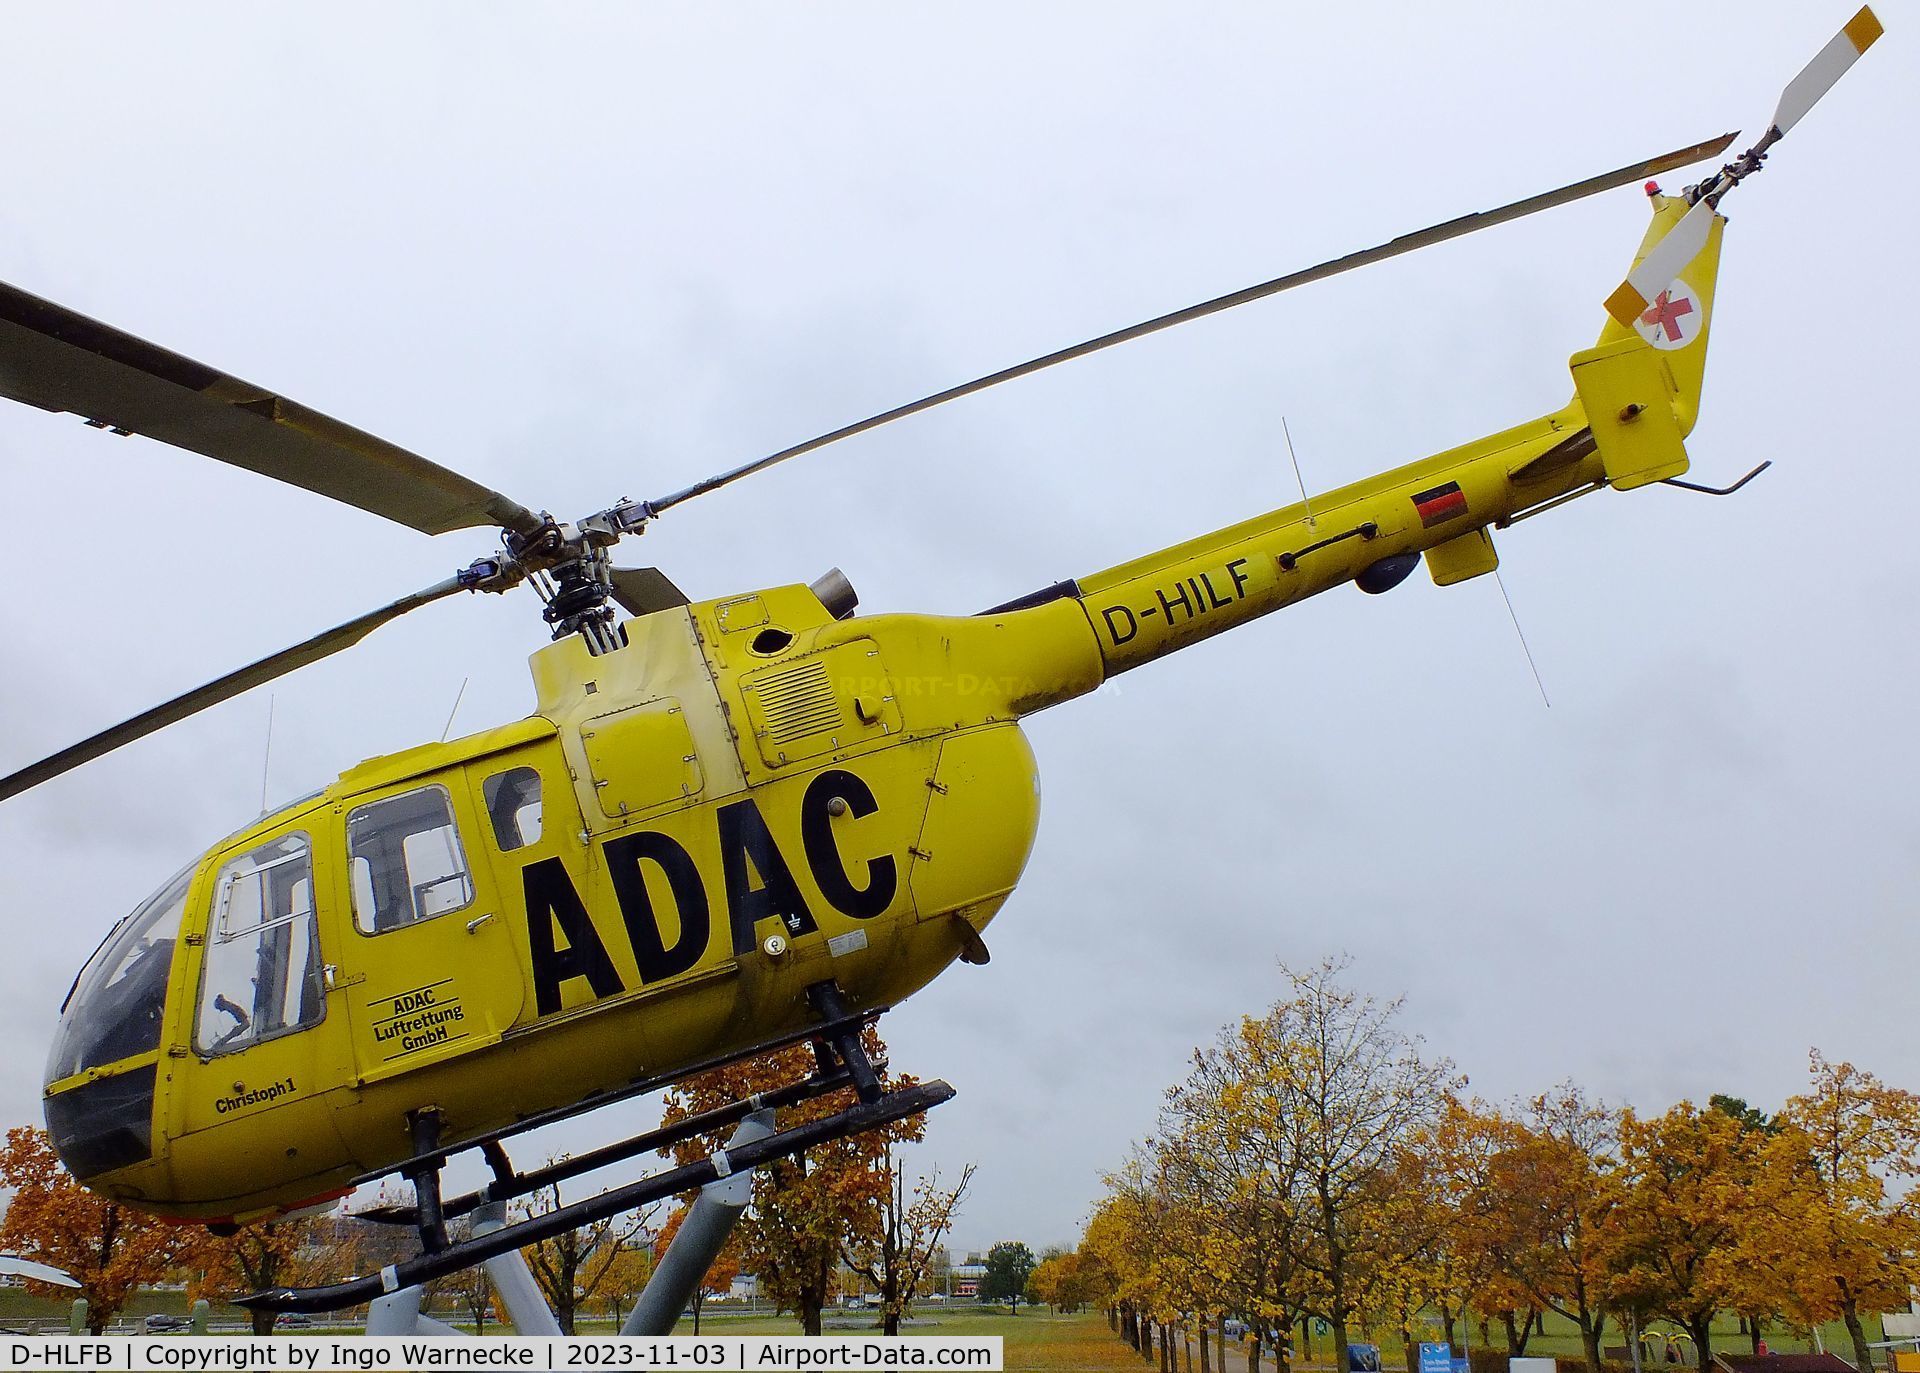 D-HLFB, MBB Bo-105S C/N S-868, MBB Bo 105S, displayed to represent 'D-HILF', the first Bo 105 EMS helicopter of the ADAC, at the visitors park of Munich international airport (Besucherpark). The real D-HILF is exhibited at the Flugwerft Schleißheim of the Deutsches Museum